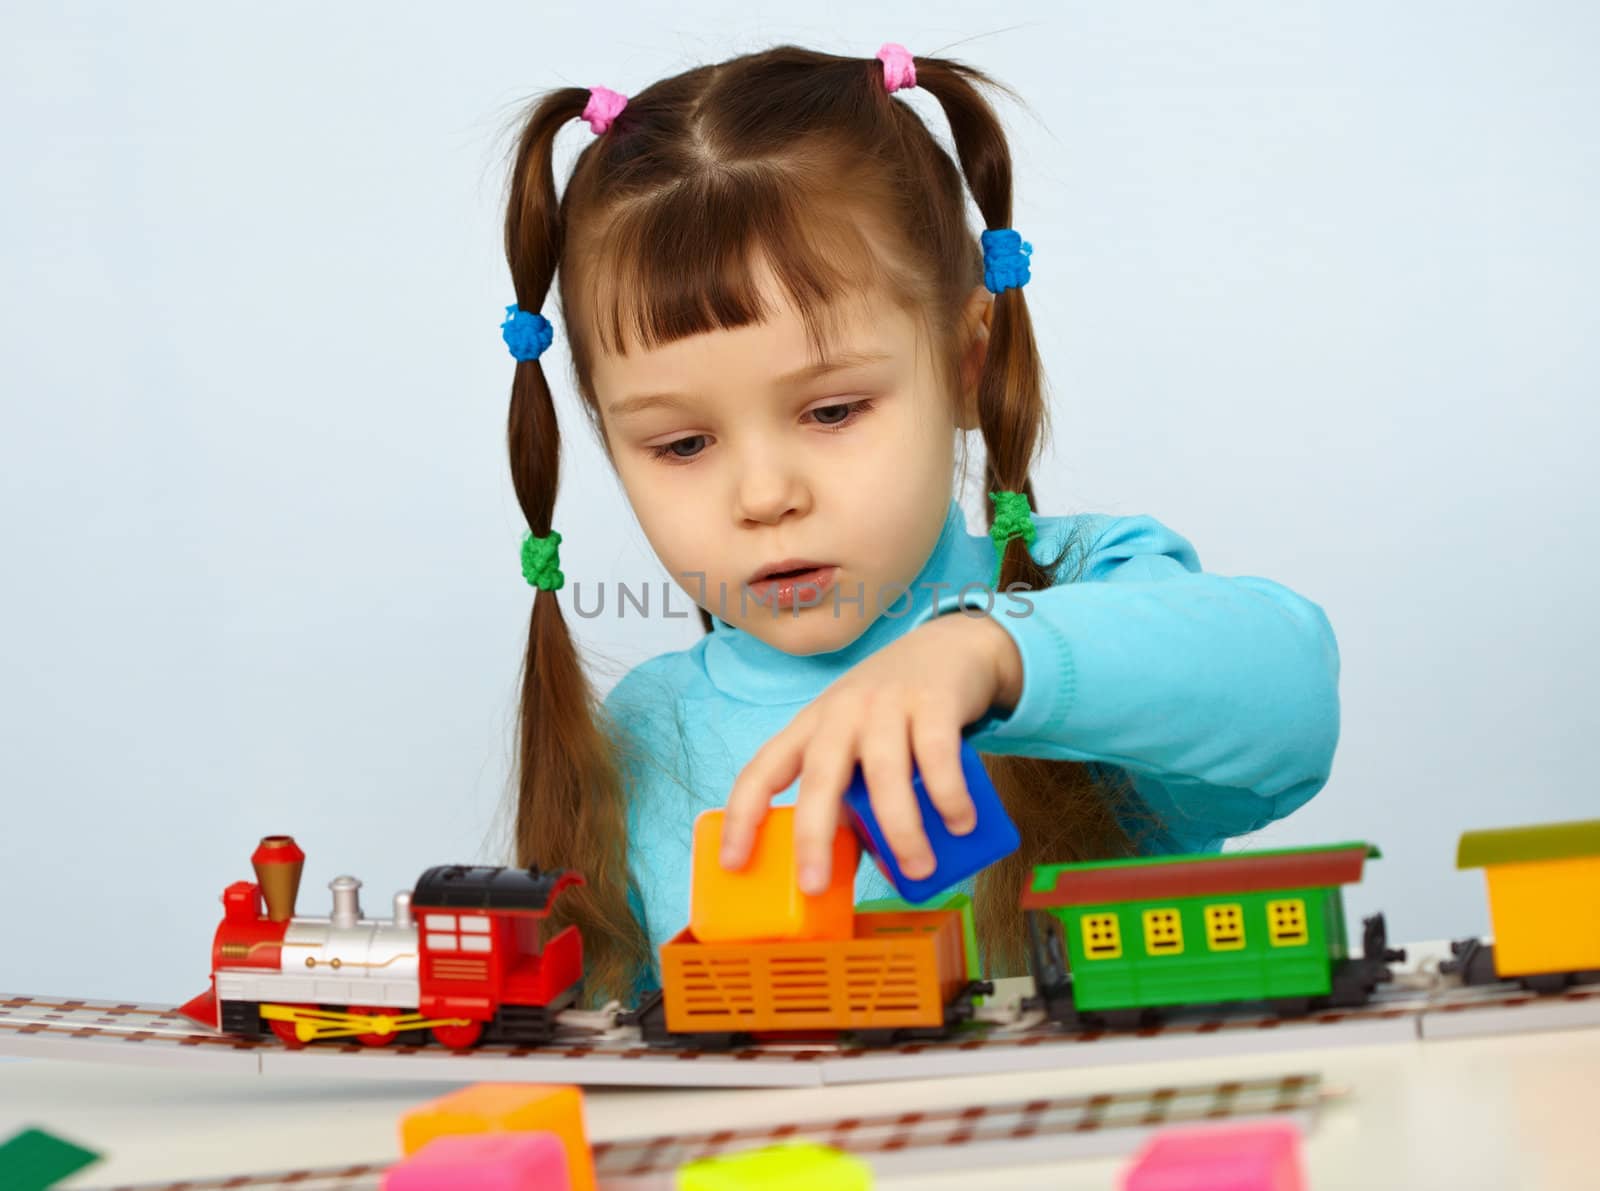 Little girl preschooler playing with toy railway by pzaxe